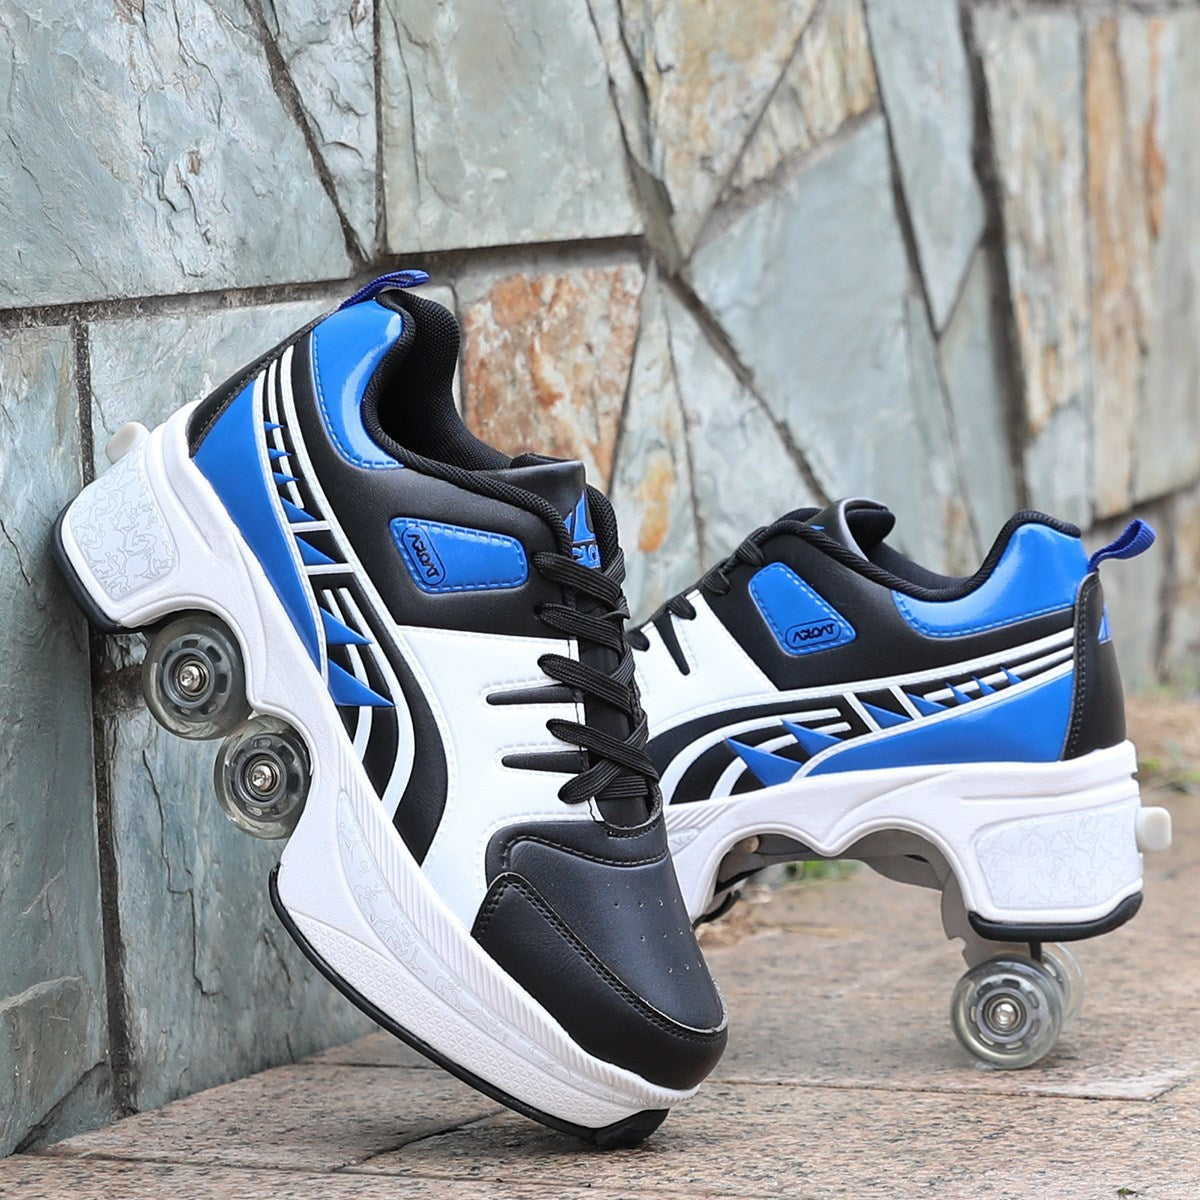 Four wheeled tiktok shoes for men and women pulley